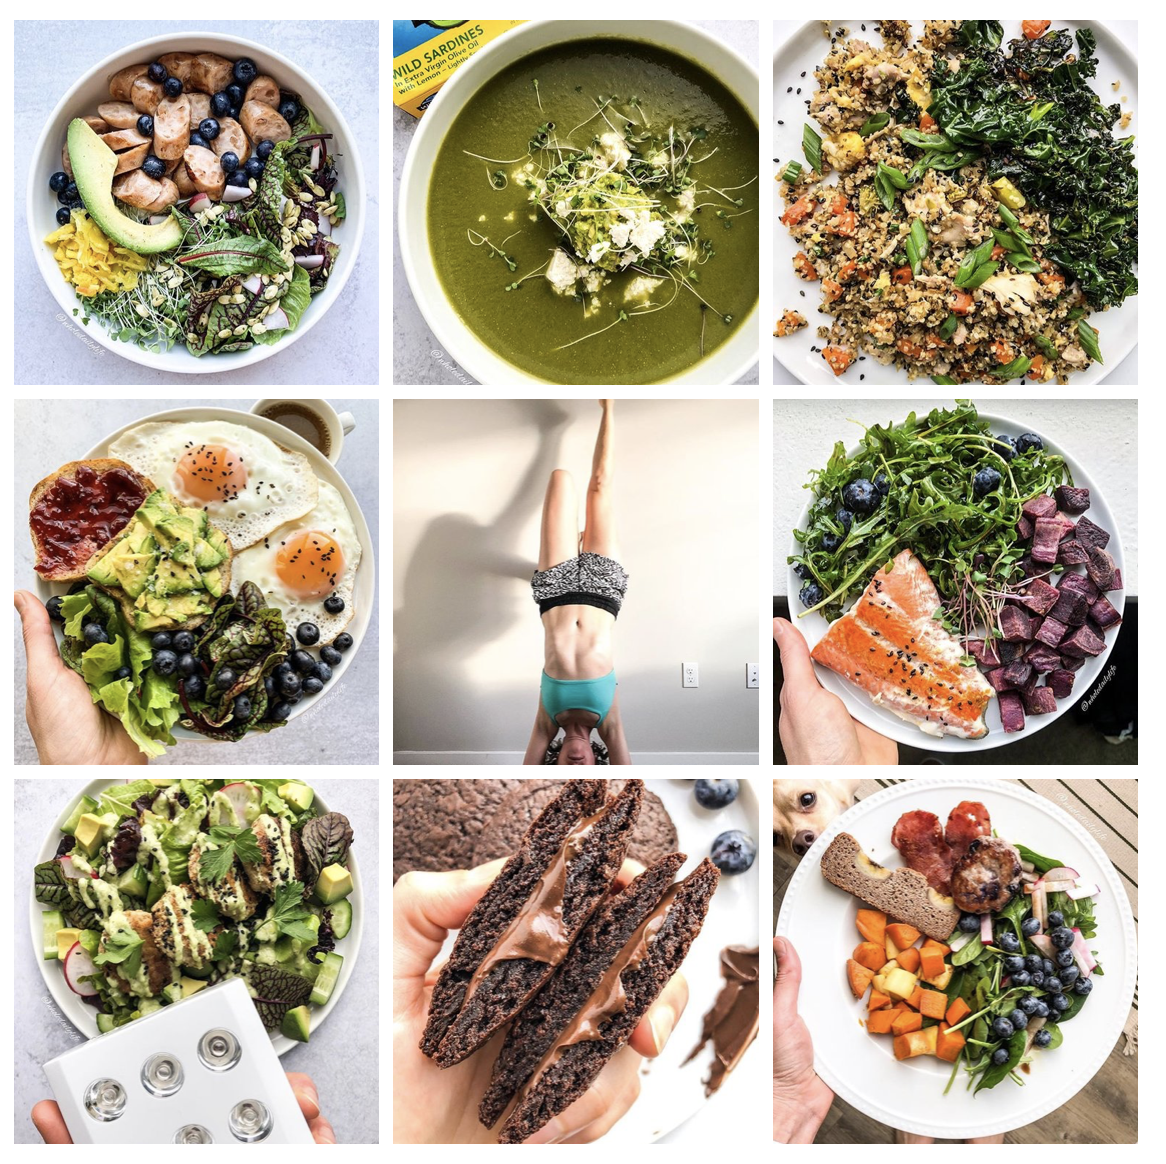 These are just some of the amazing meals Tracey shares on Instagram! Be sure to follow her to get more of this delicious cooking inspo!